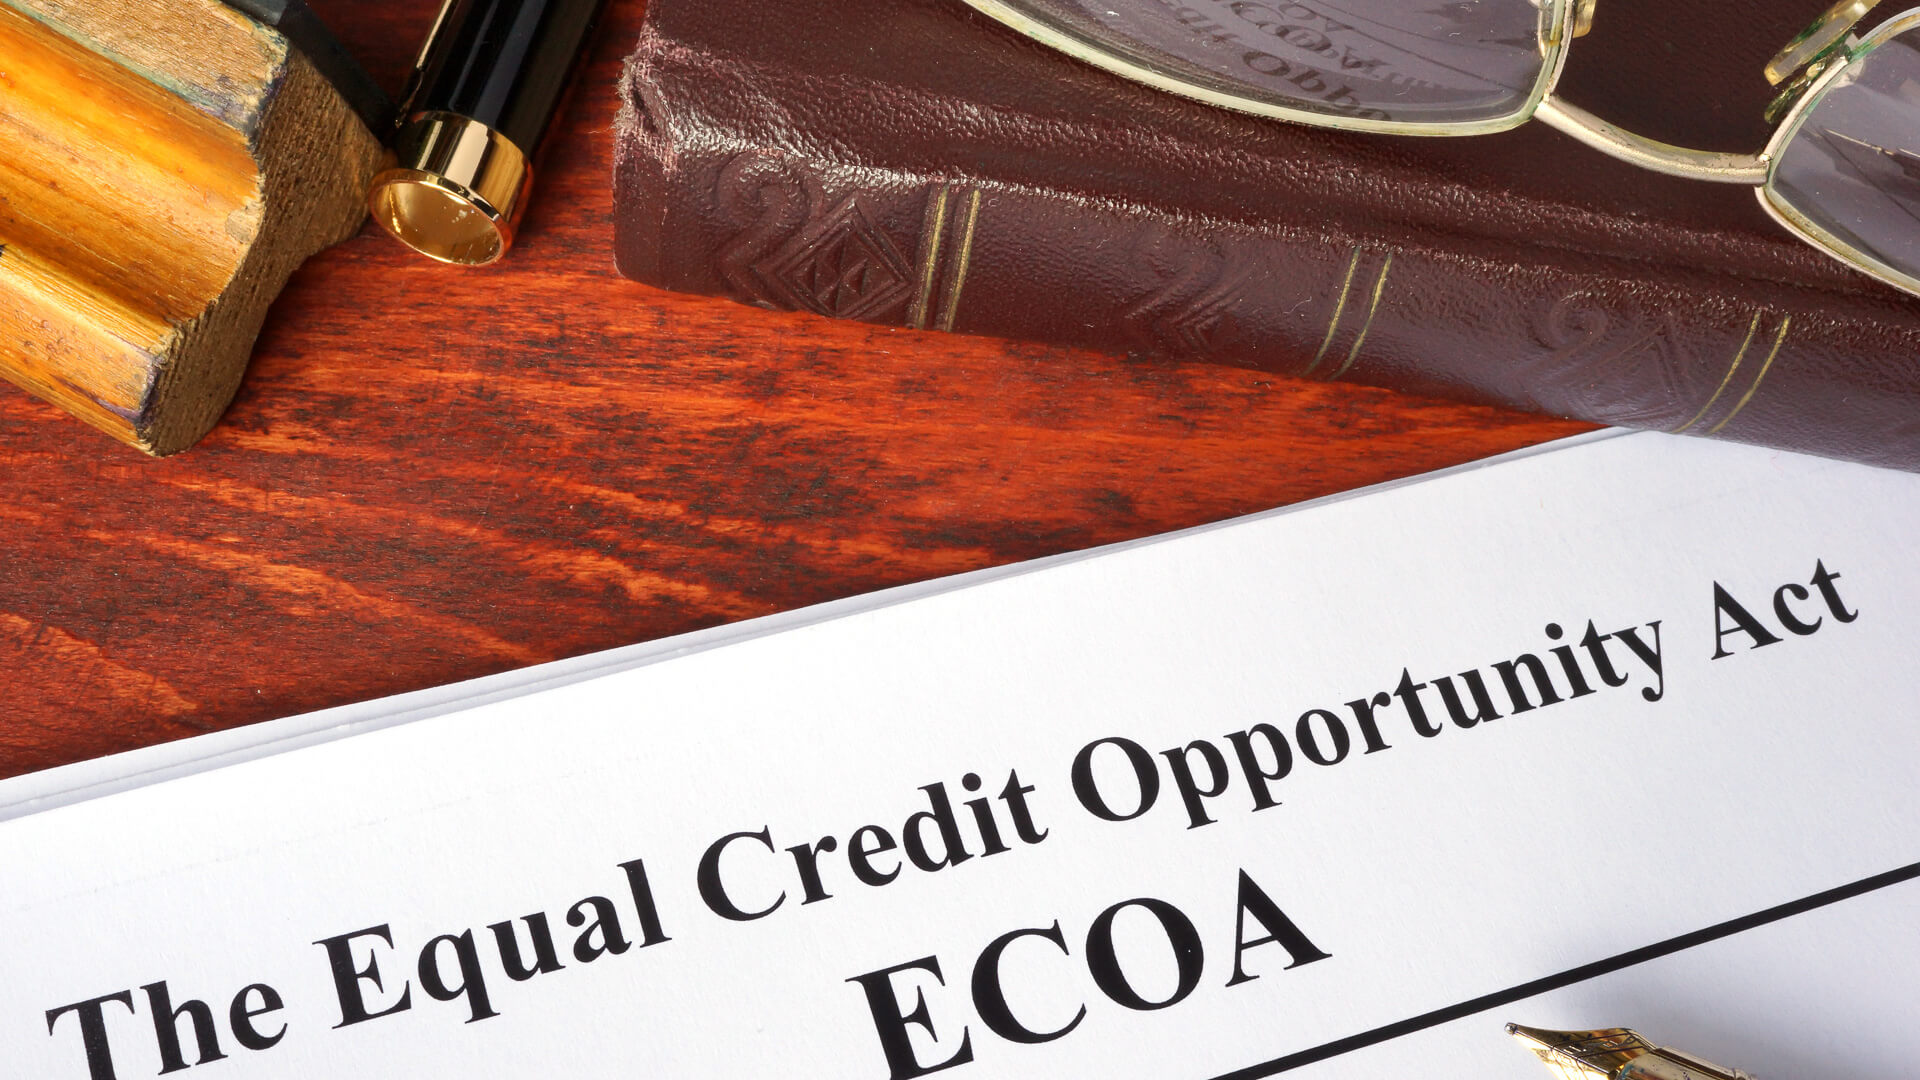 equal credit opportunity act ecoa